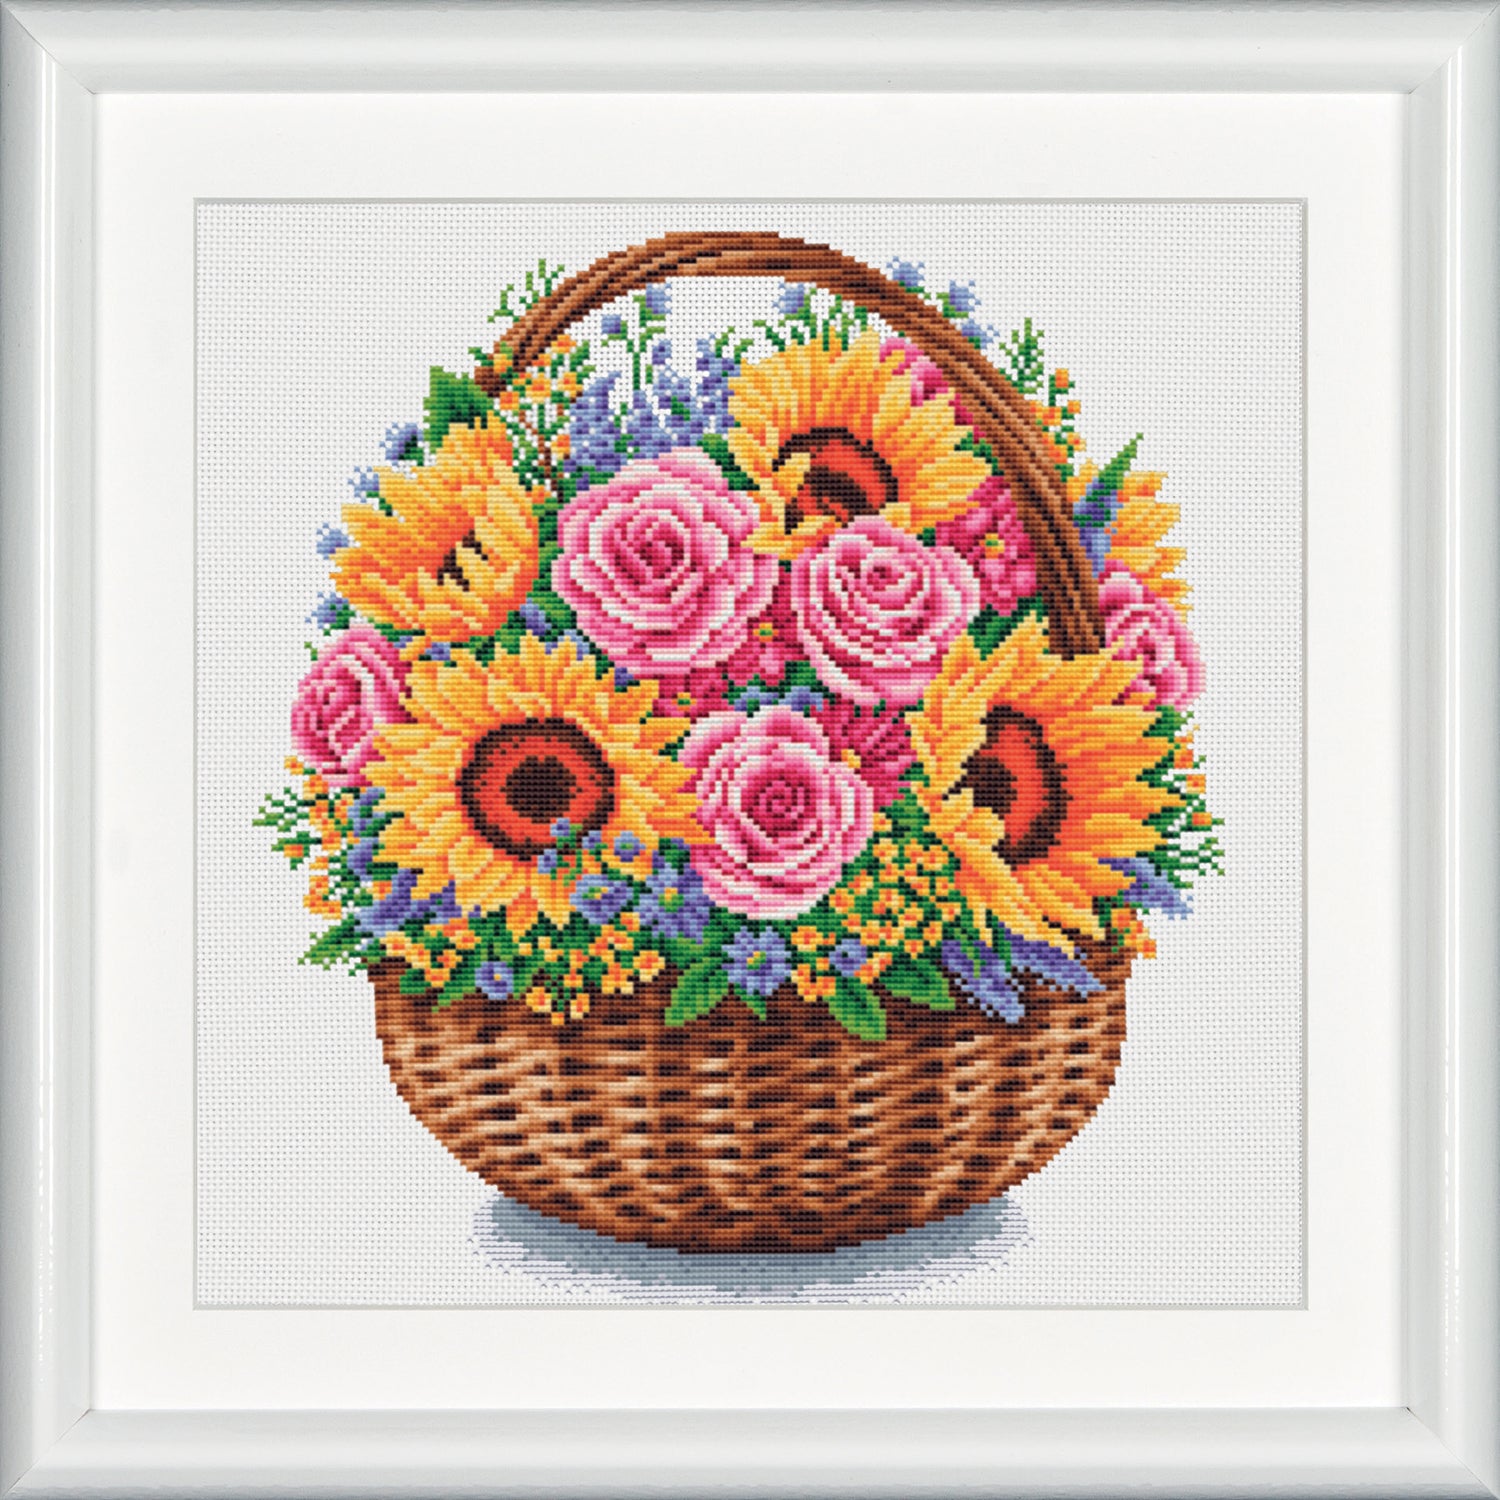 Decorate your home with a plethora of colors from this bright floral embroidery design. The pink and yellow nicely sync with blue and brown colors. With this rich finesse, this embroidered design can become a color accent in your interior. DSB cross stitch kits have easy to follow design charts and contain all items needed to facilitate embroidery without hassle. To cater to both beginners as well as advanced stitching artists.